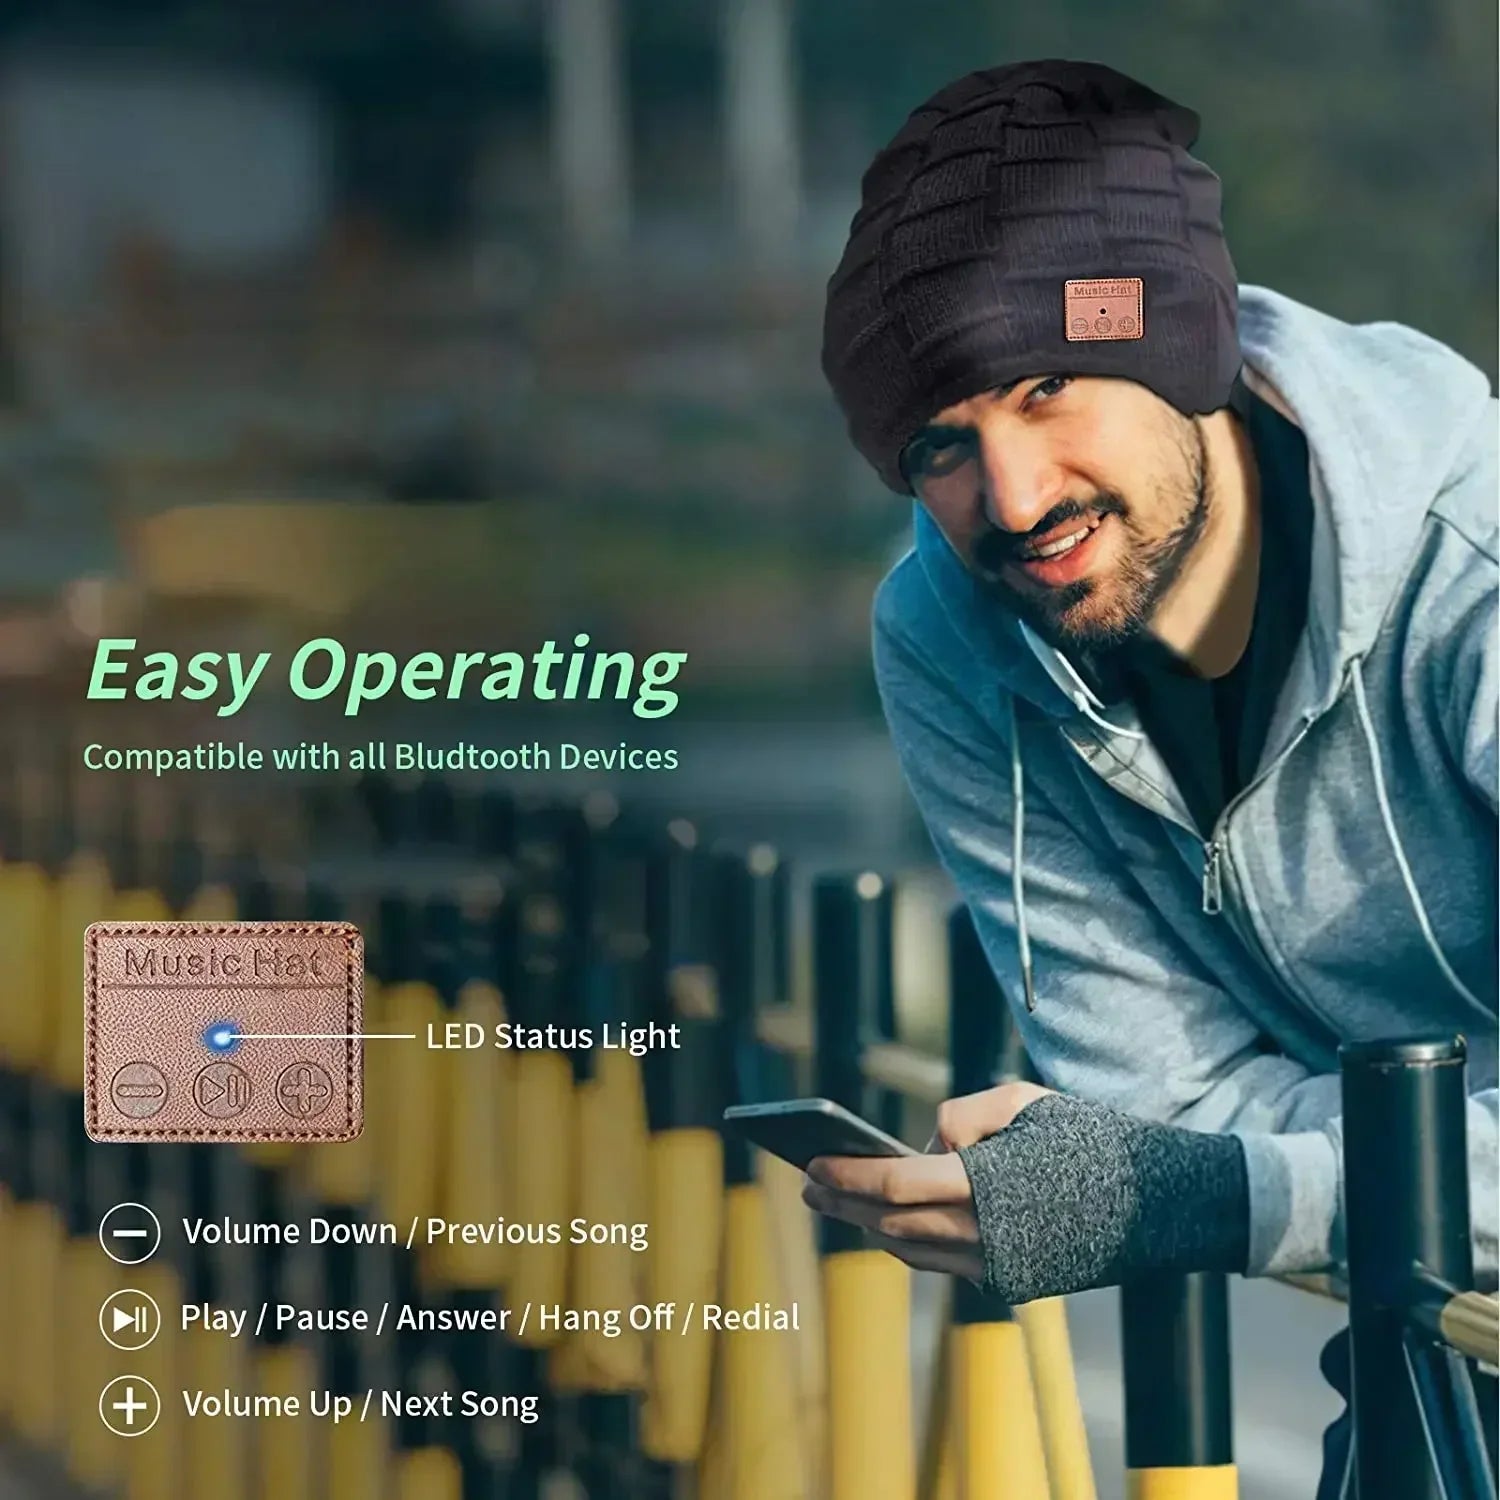 A man outside in cold weather smiling and wearing a dark beanie, with icons indicating easy operation of an embedded device.